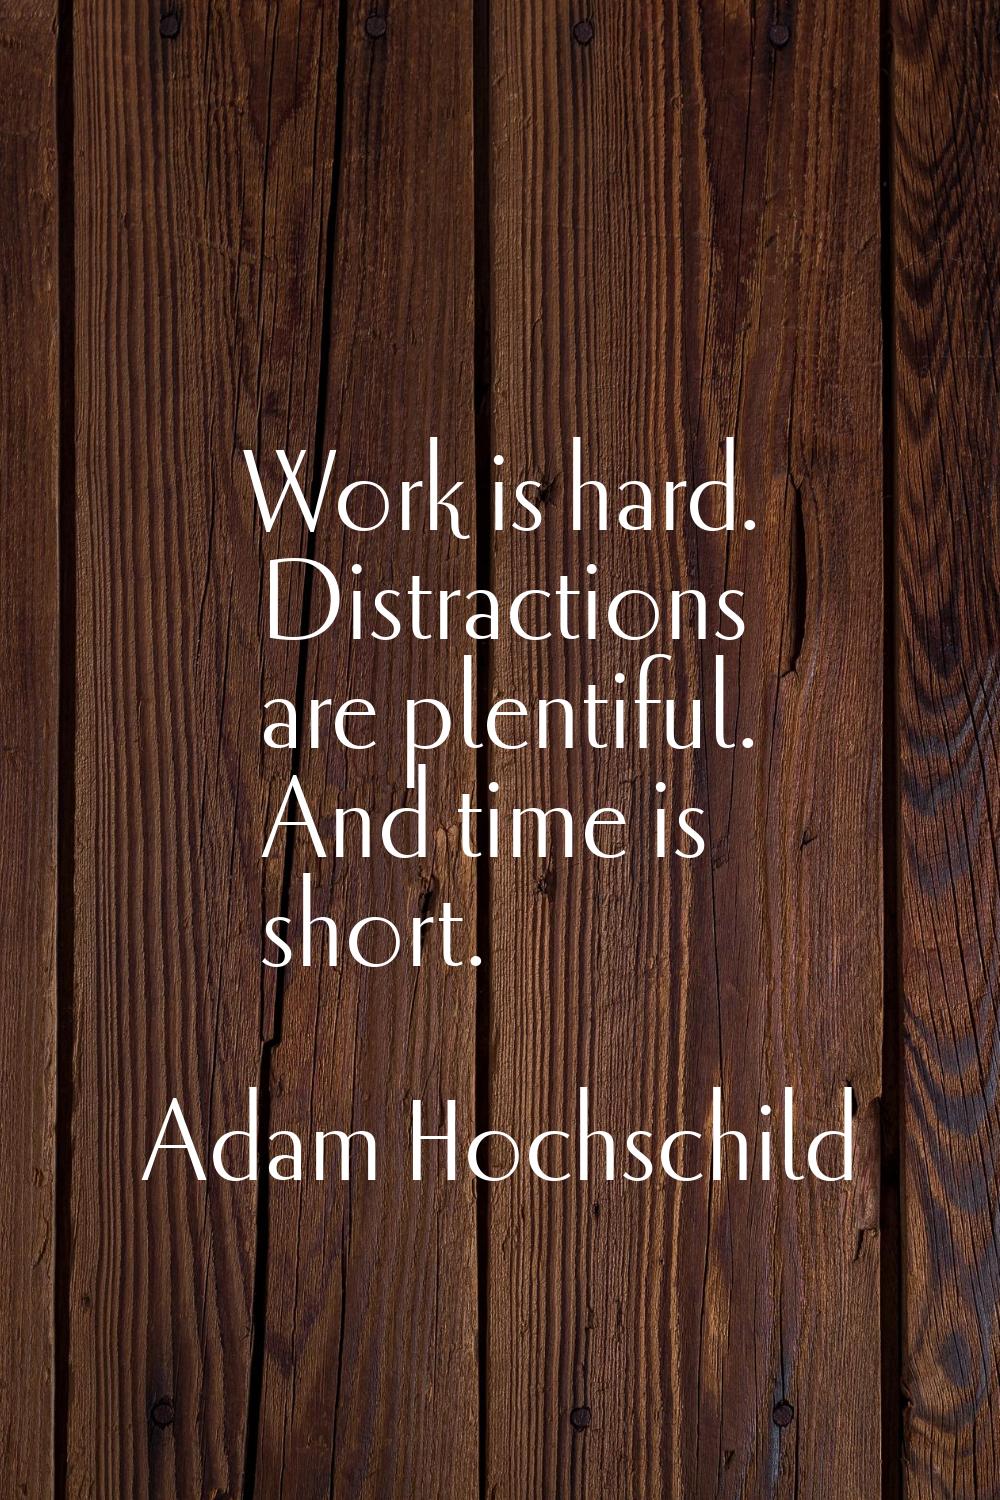 Work is hard. Distractions are plentiful. And time is short.